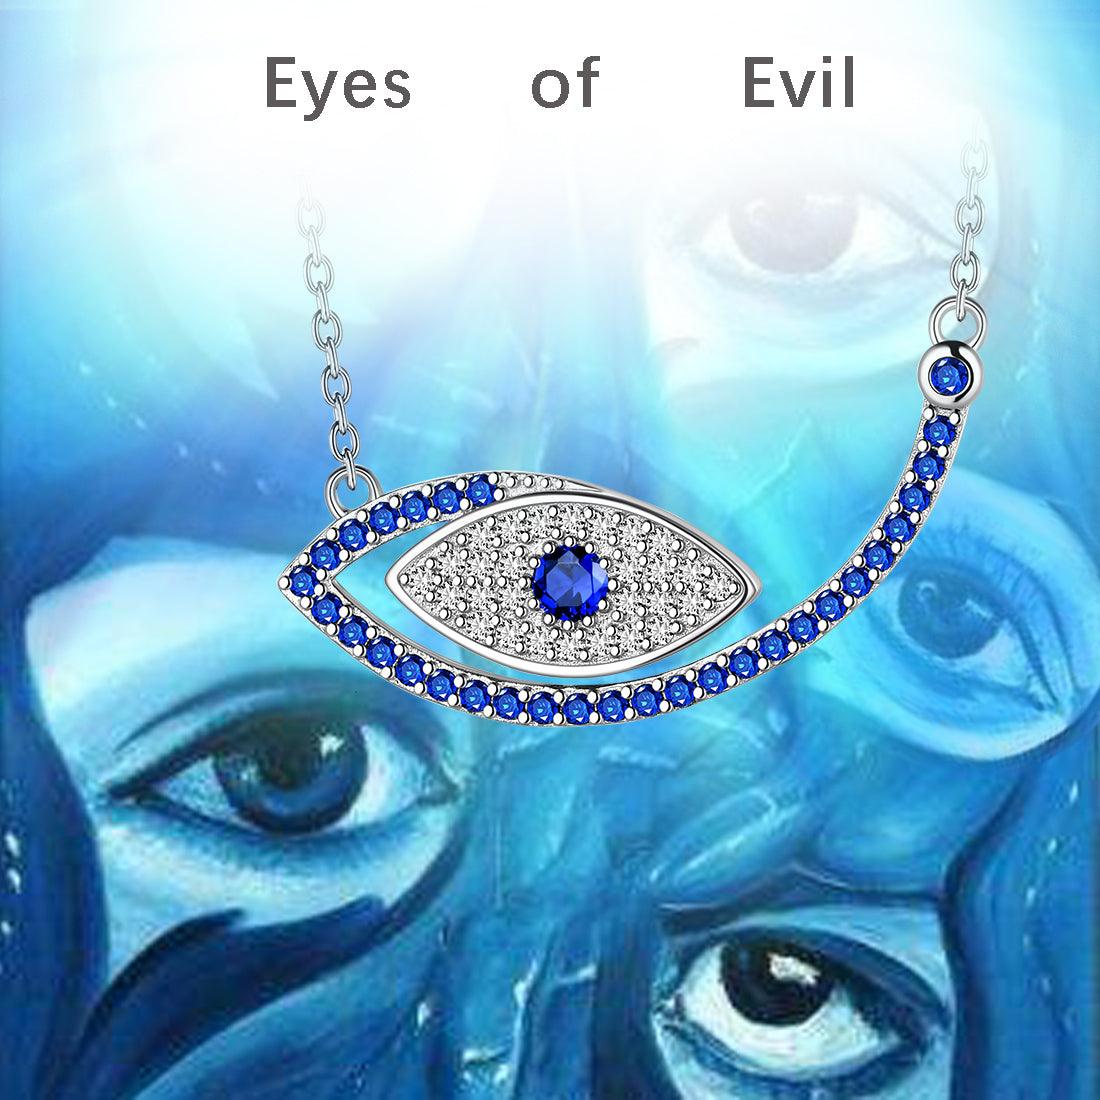 Evil Eye Necklace Pendant Amulet Jewelry Sterling Silver - Necklaces - Aurora Tears